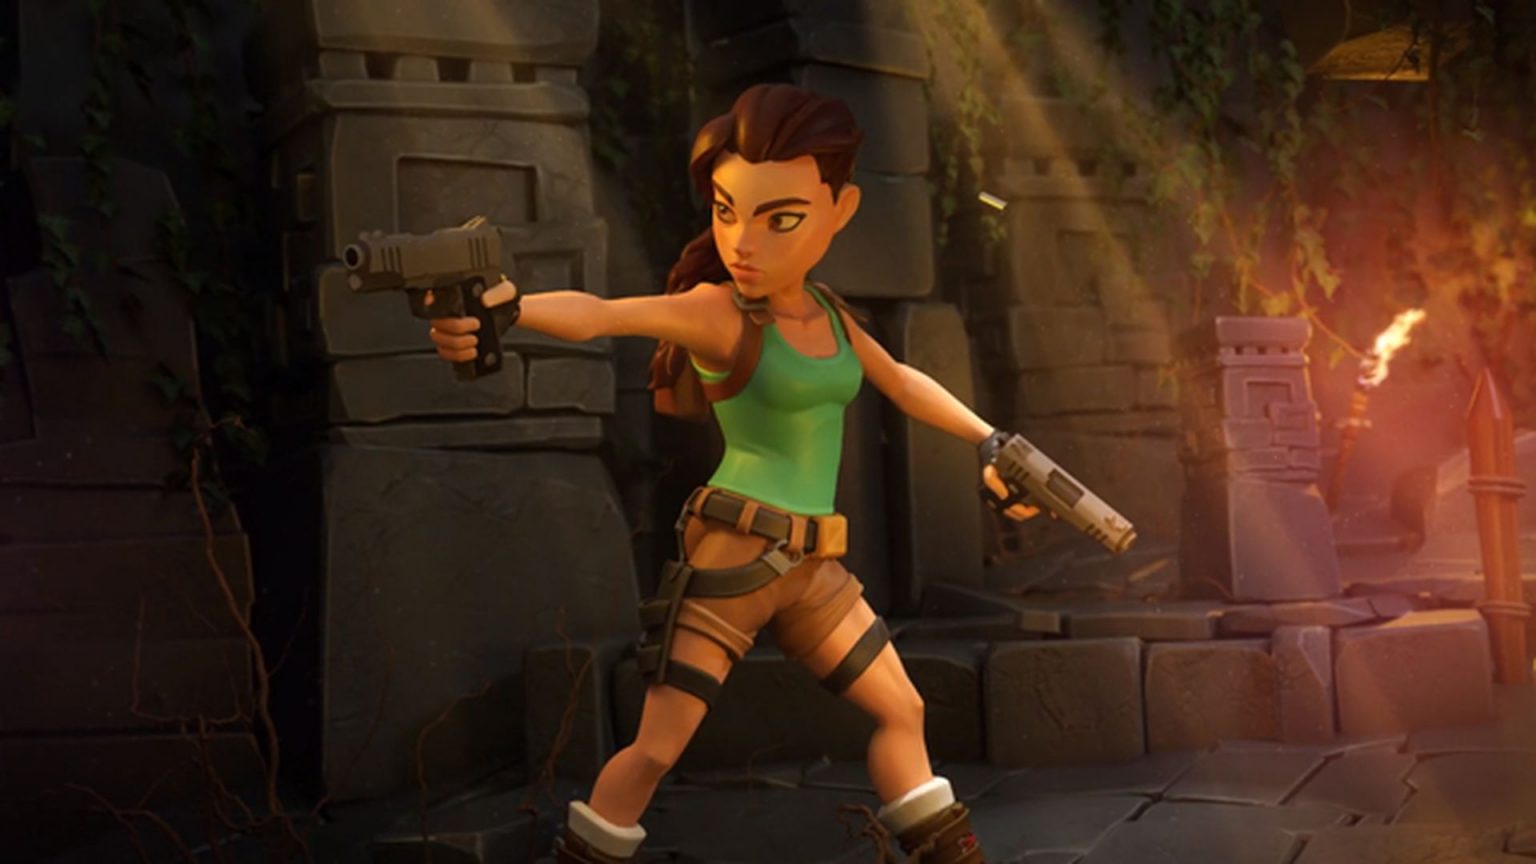 tomb raider reloaded mobile